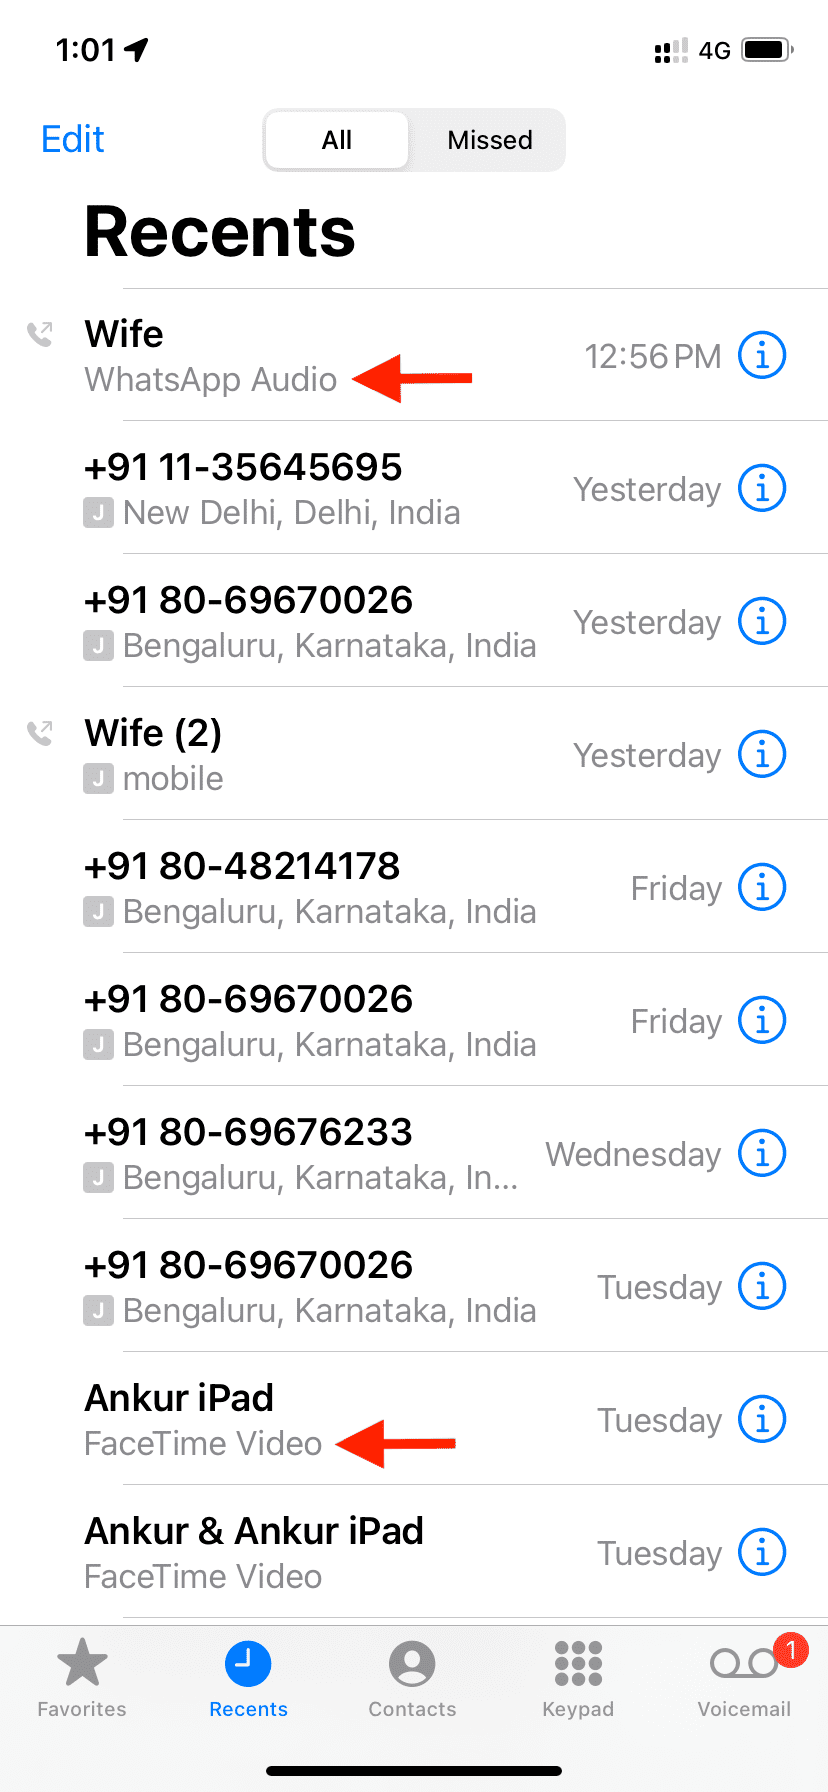 Recents tab of iPhone Phone app showing WhatsApp, carrier, and FaceTime calls